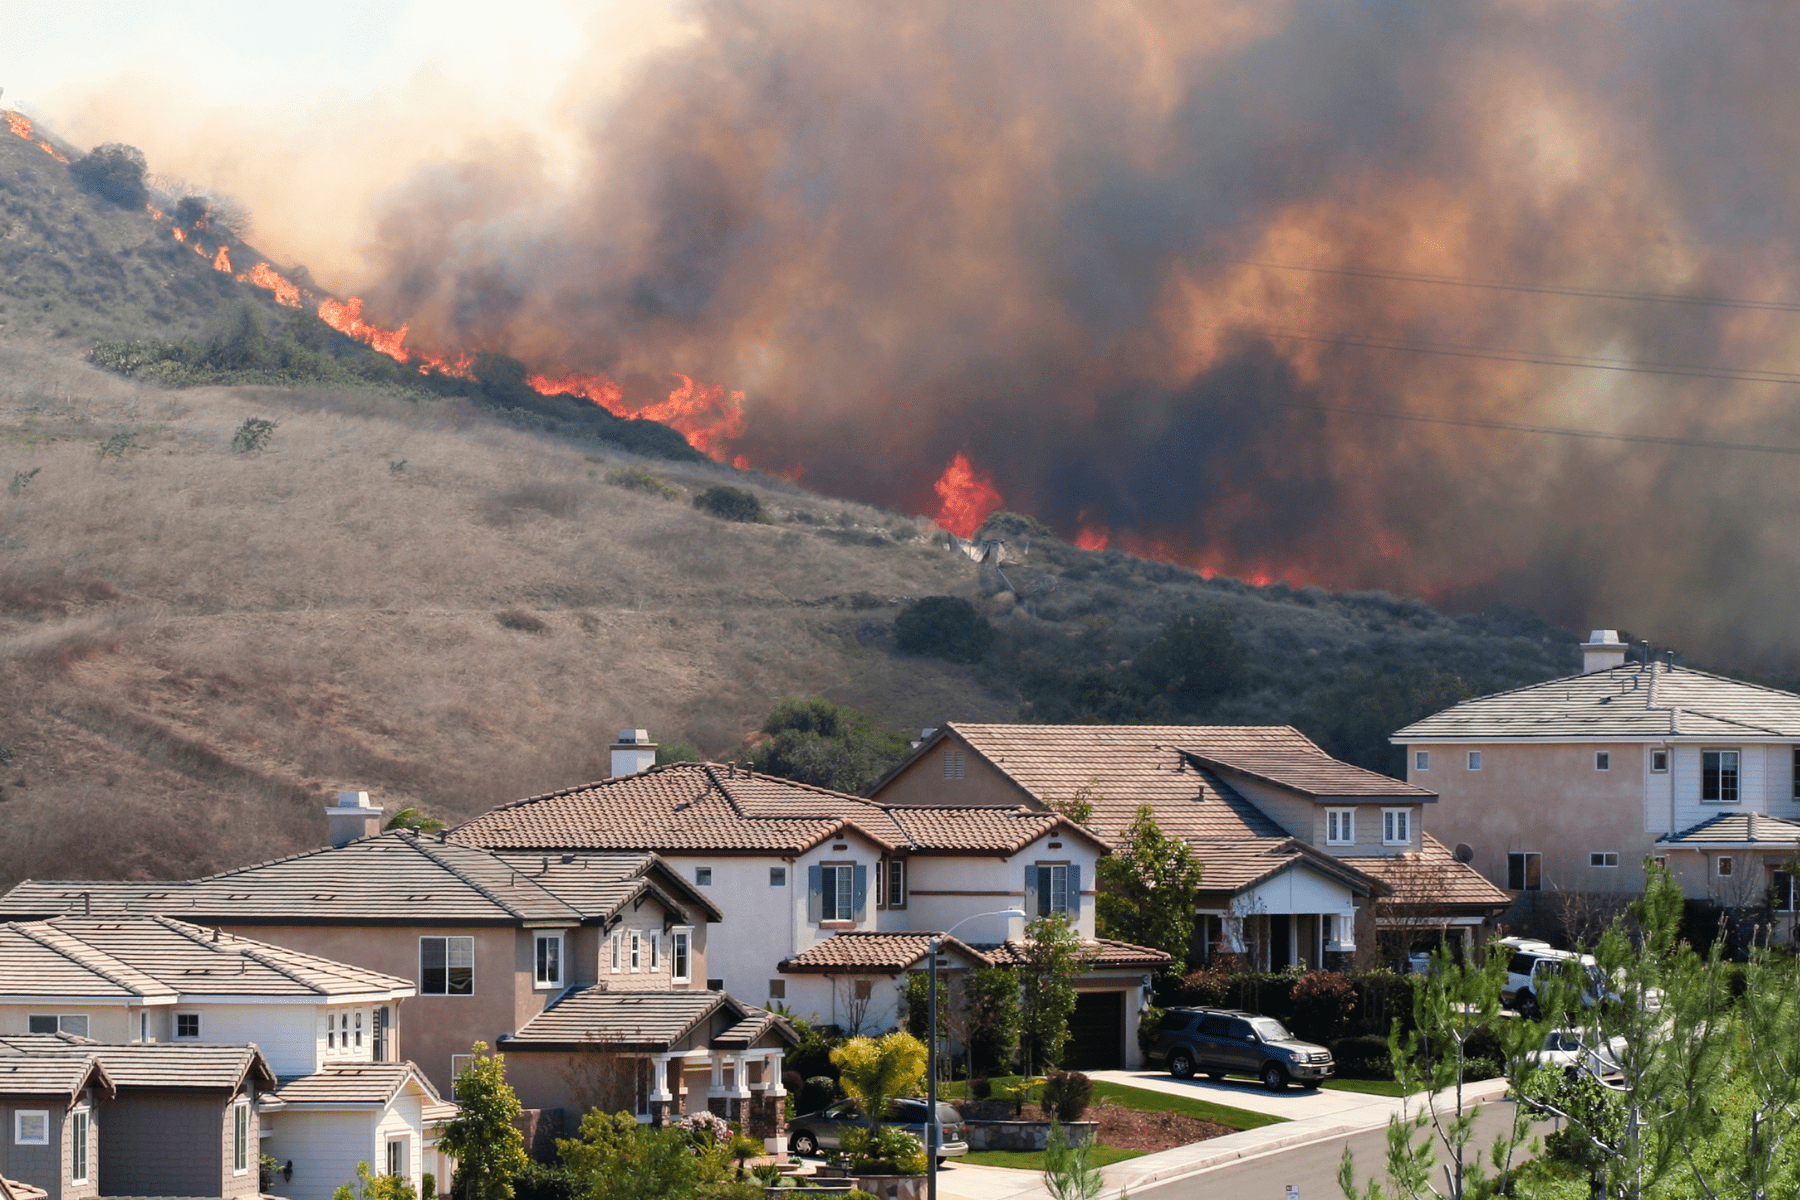 A brush fire near homes in Southern California.